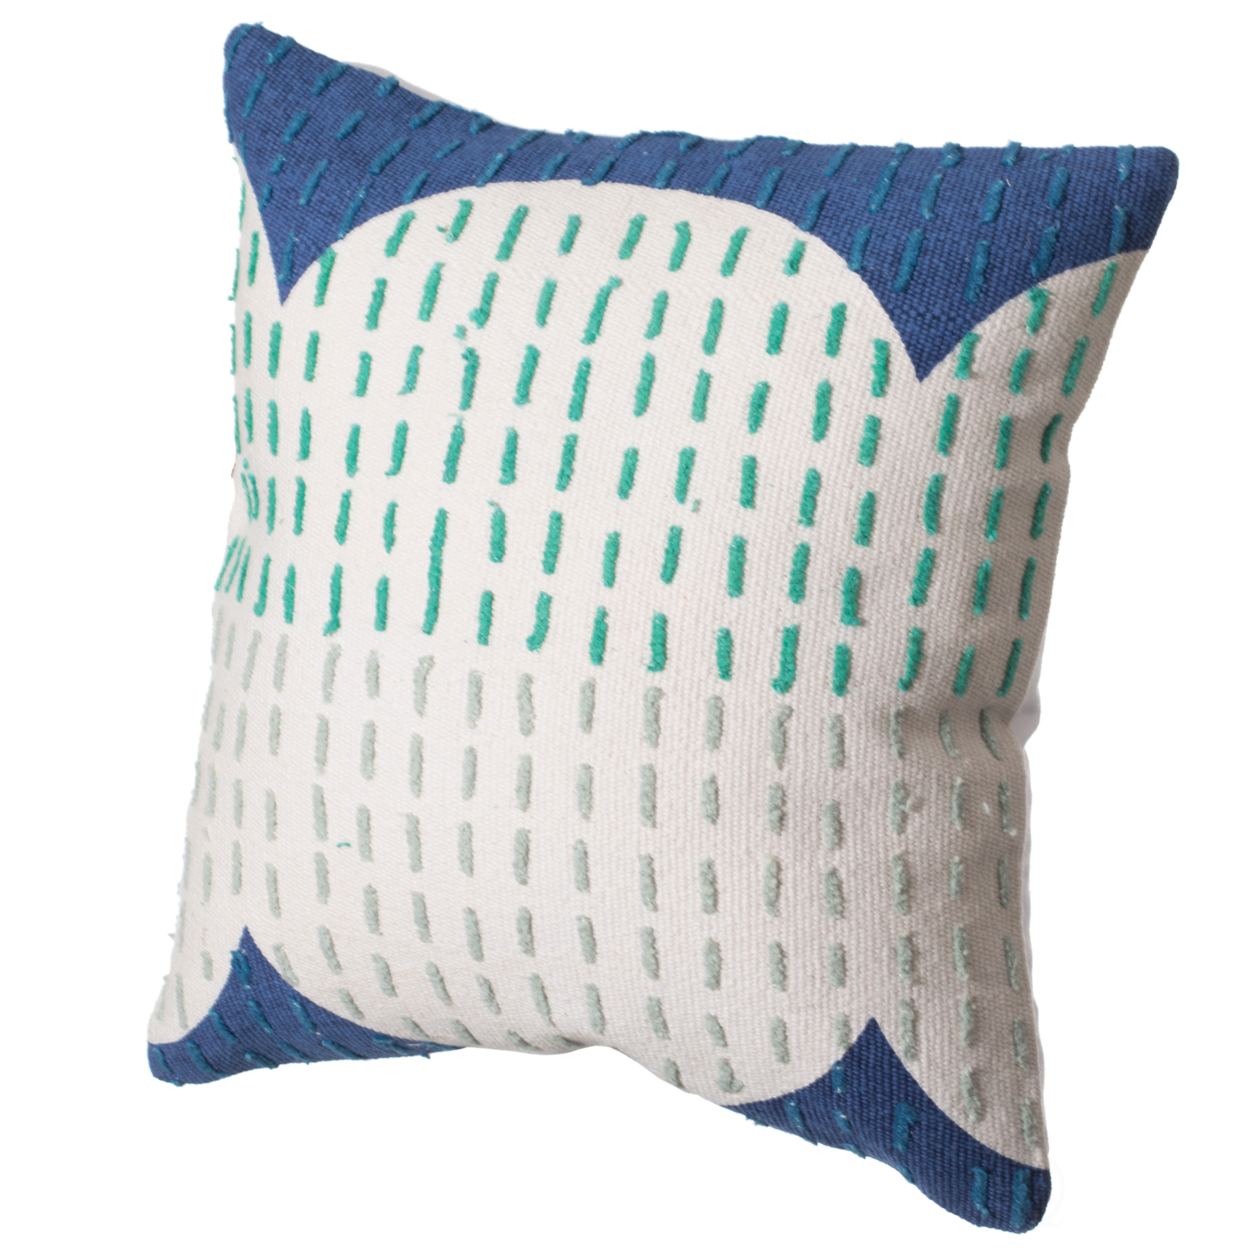 16 Handwoven Cotton Throw Pillow Cover With Ribbed Line Dots And Wave Border - Mustard